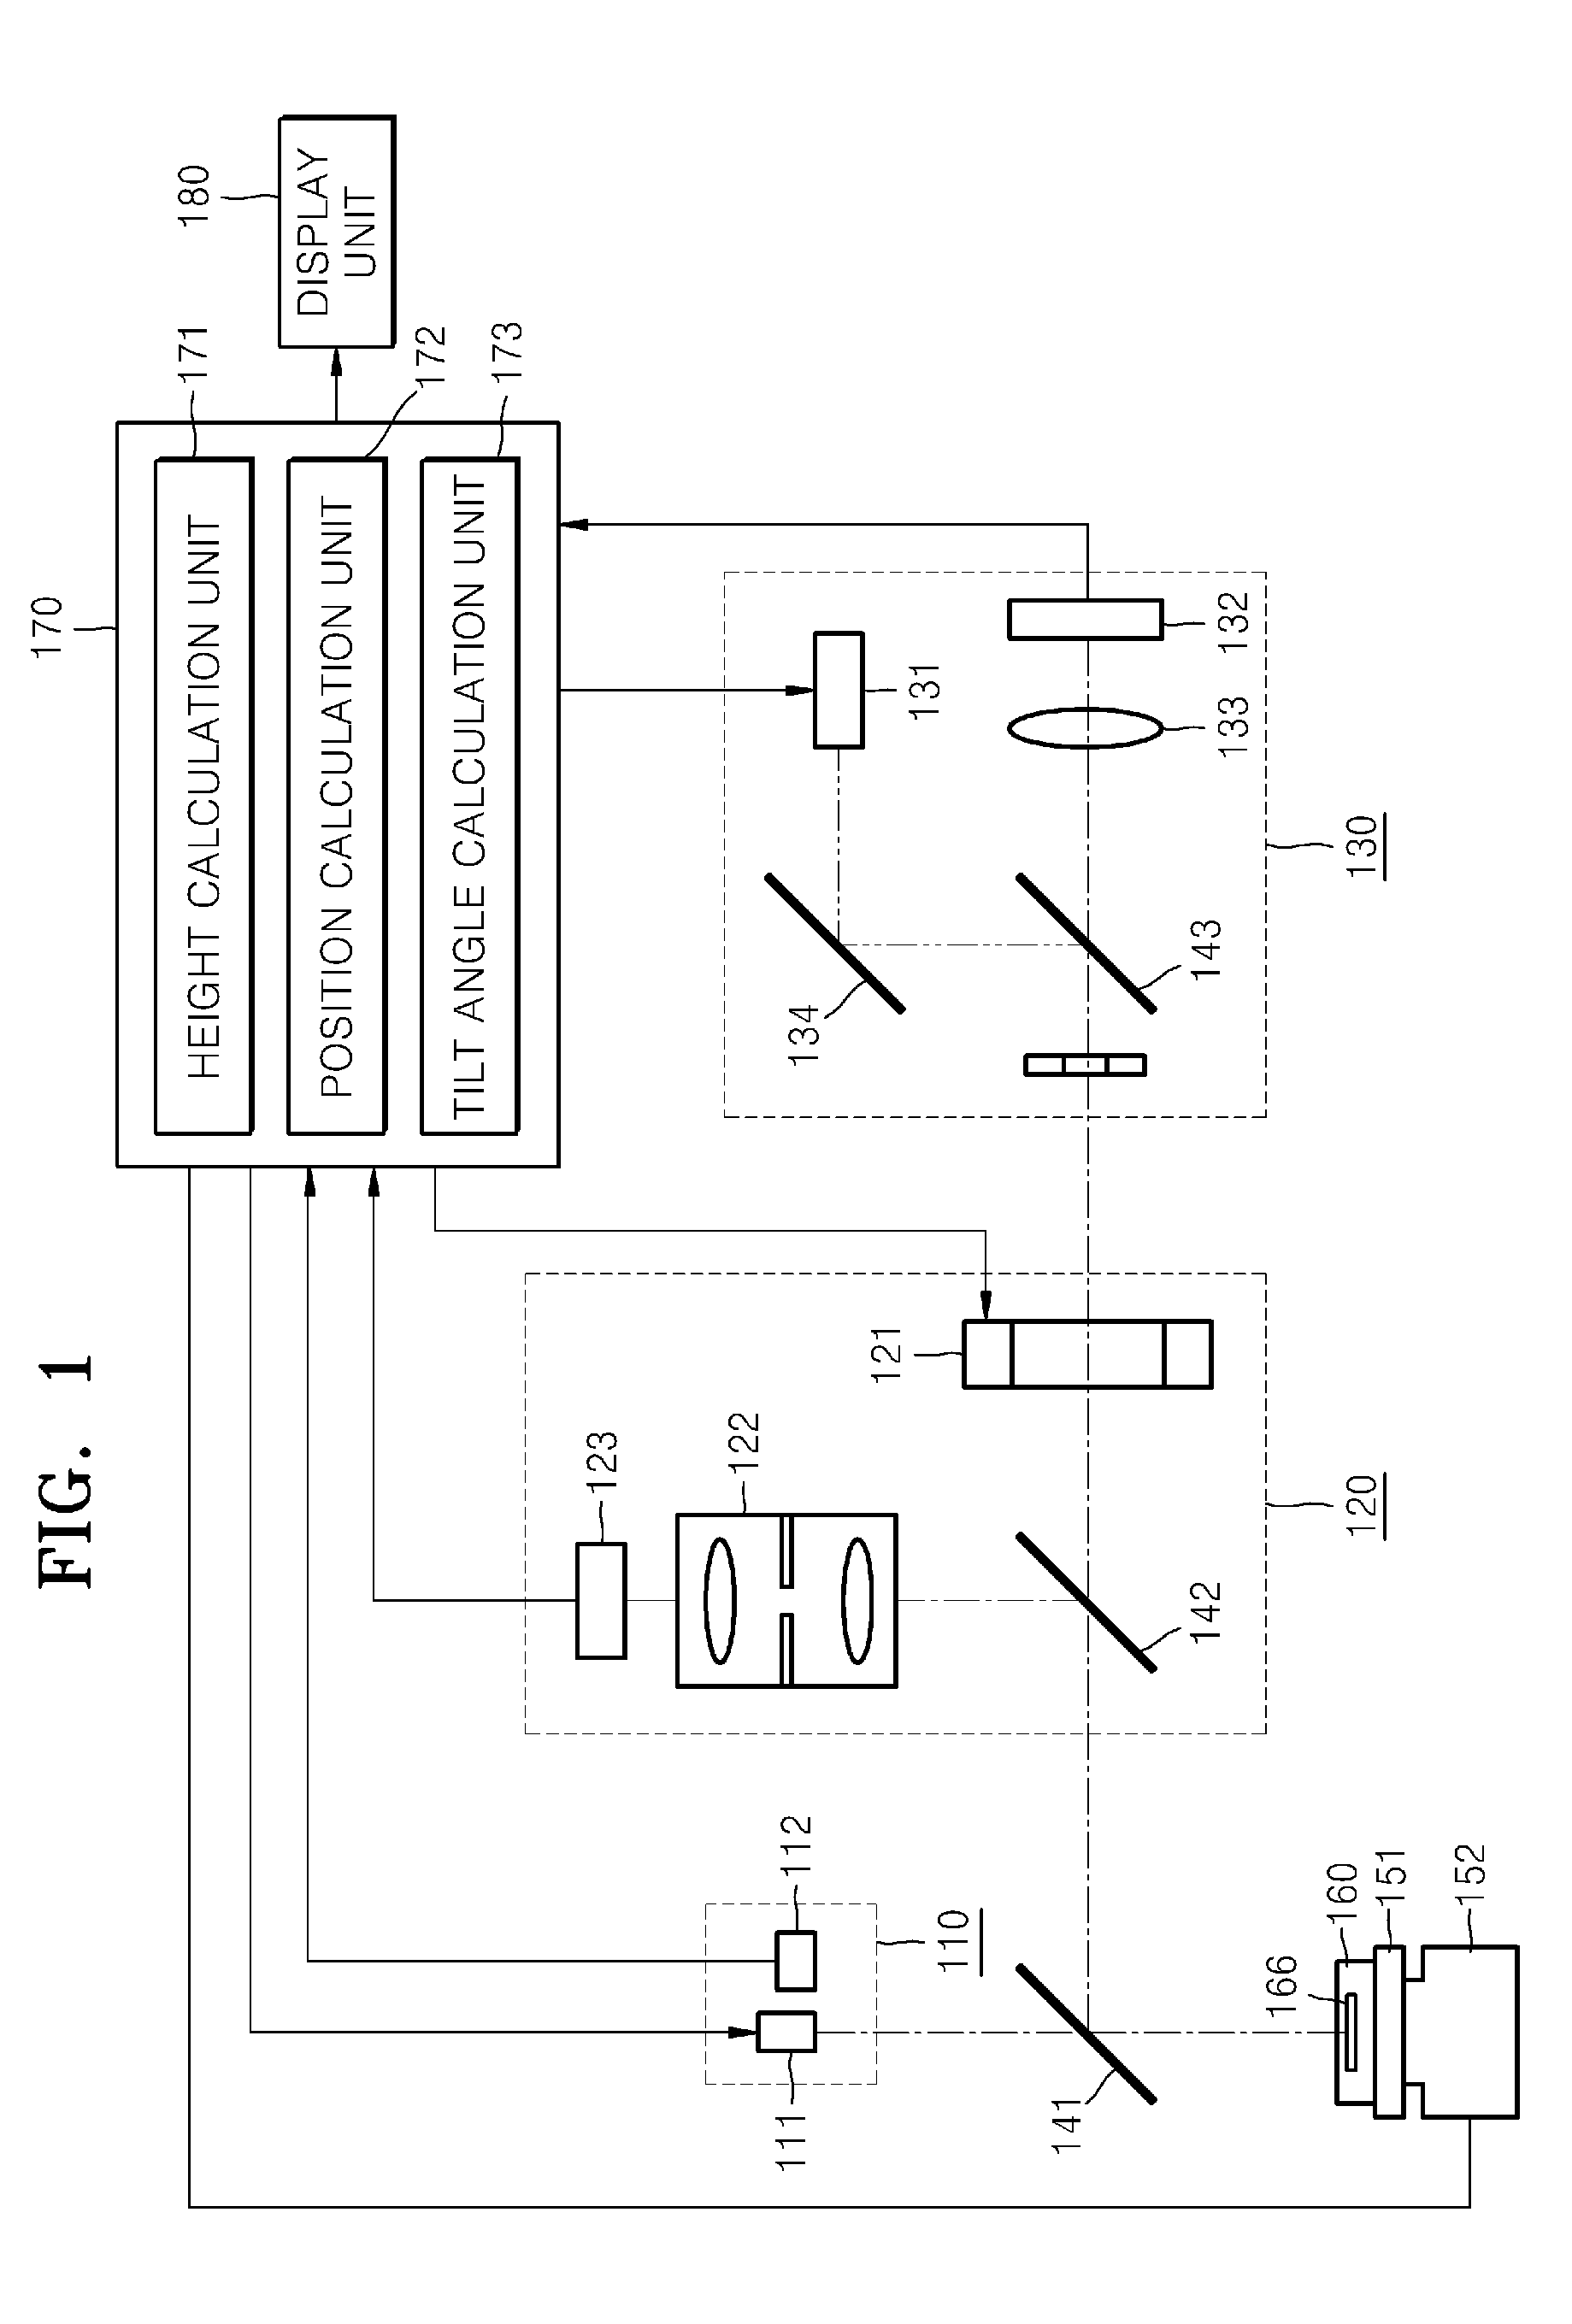 Method and apparatus for measuring 3-dimensional position and orientation of reflective mirror package